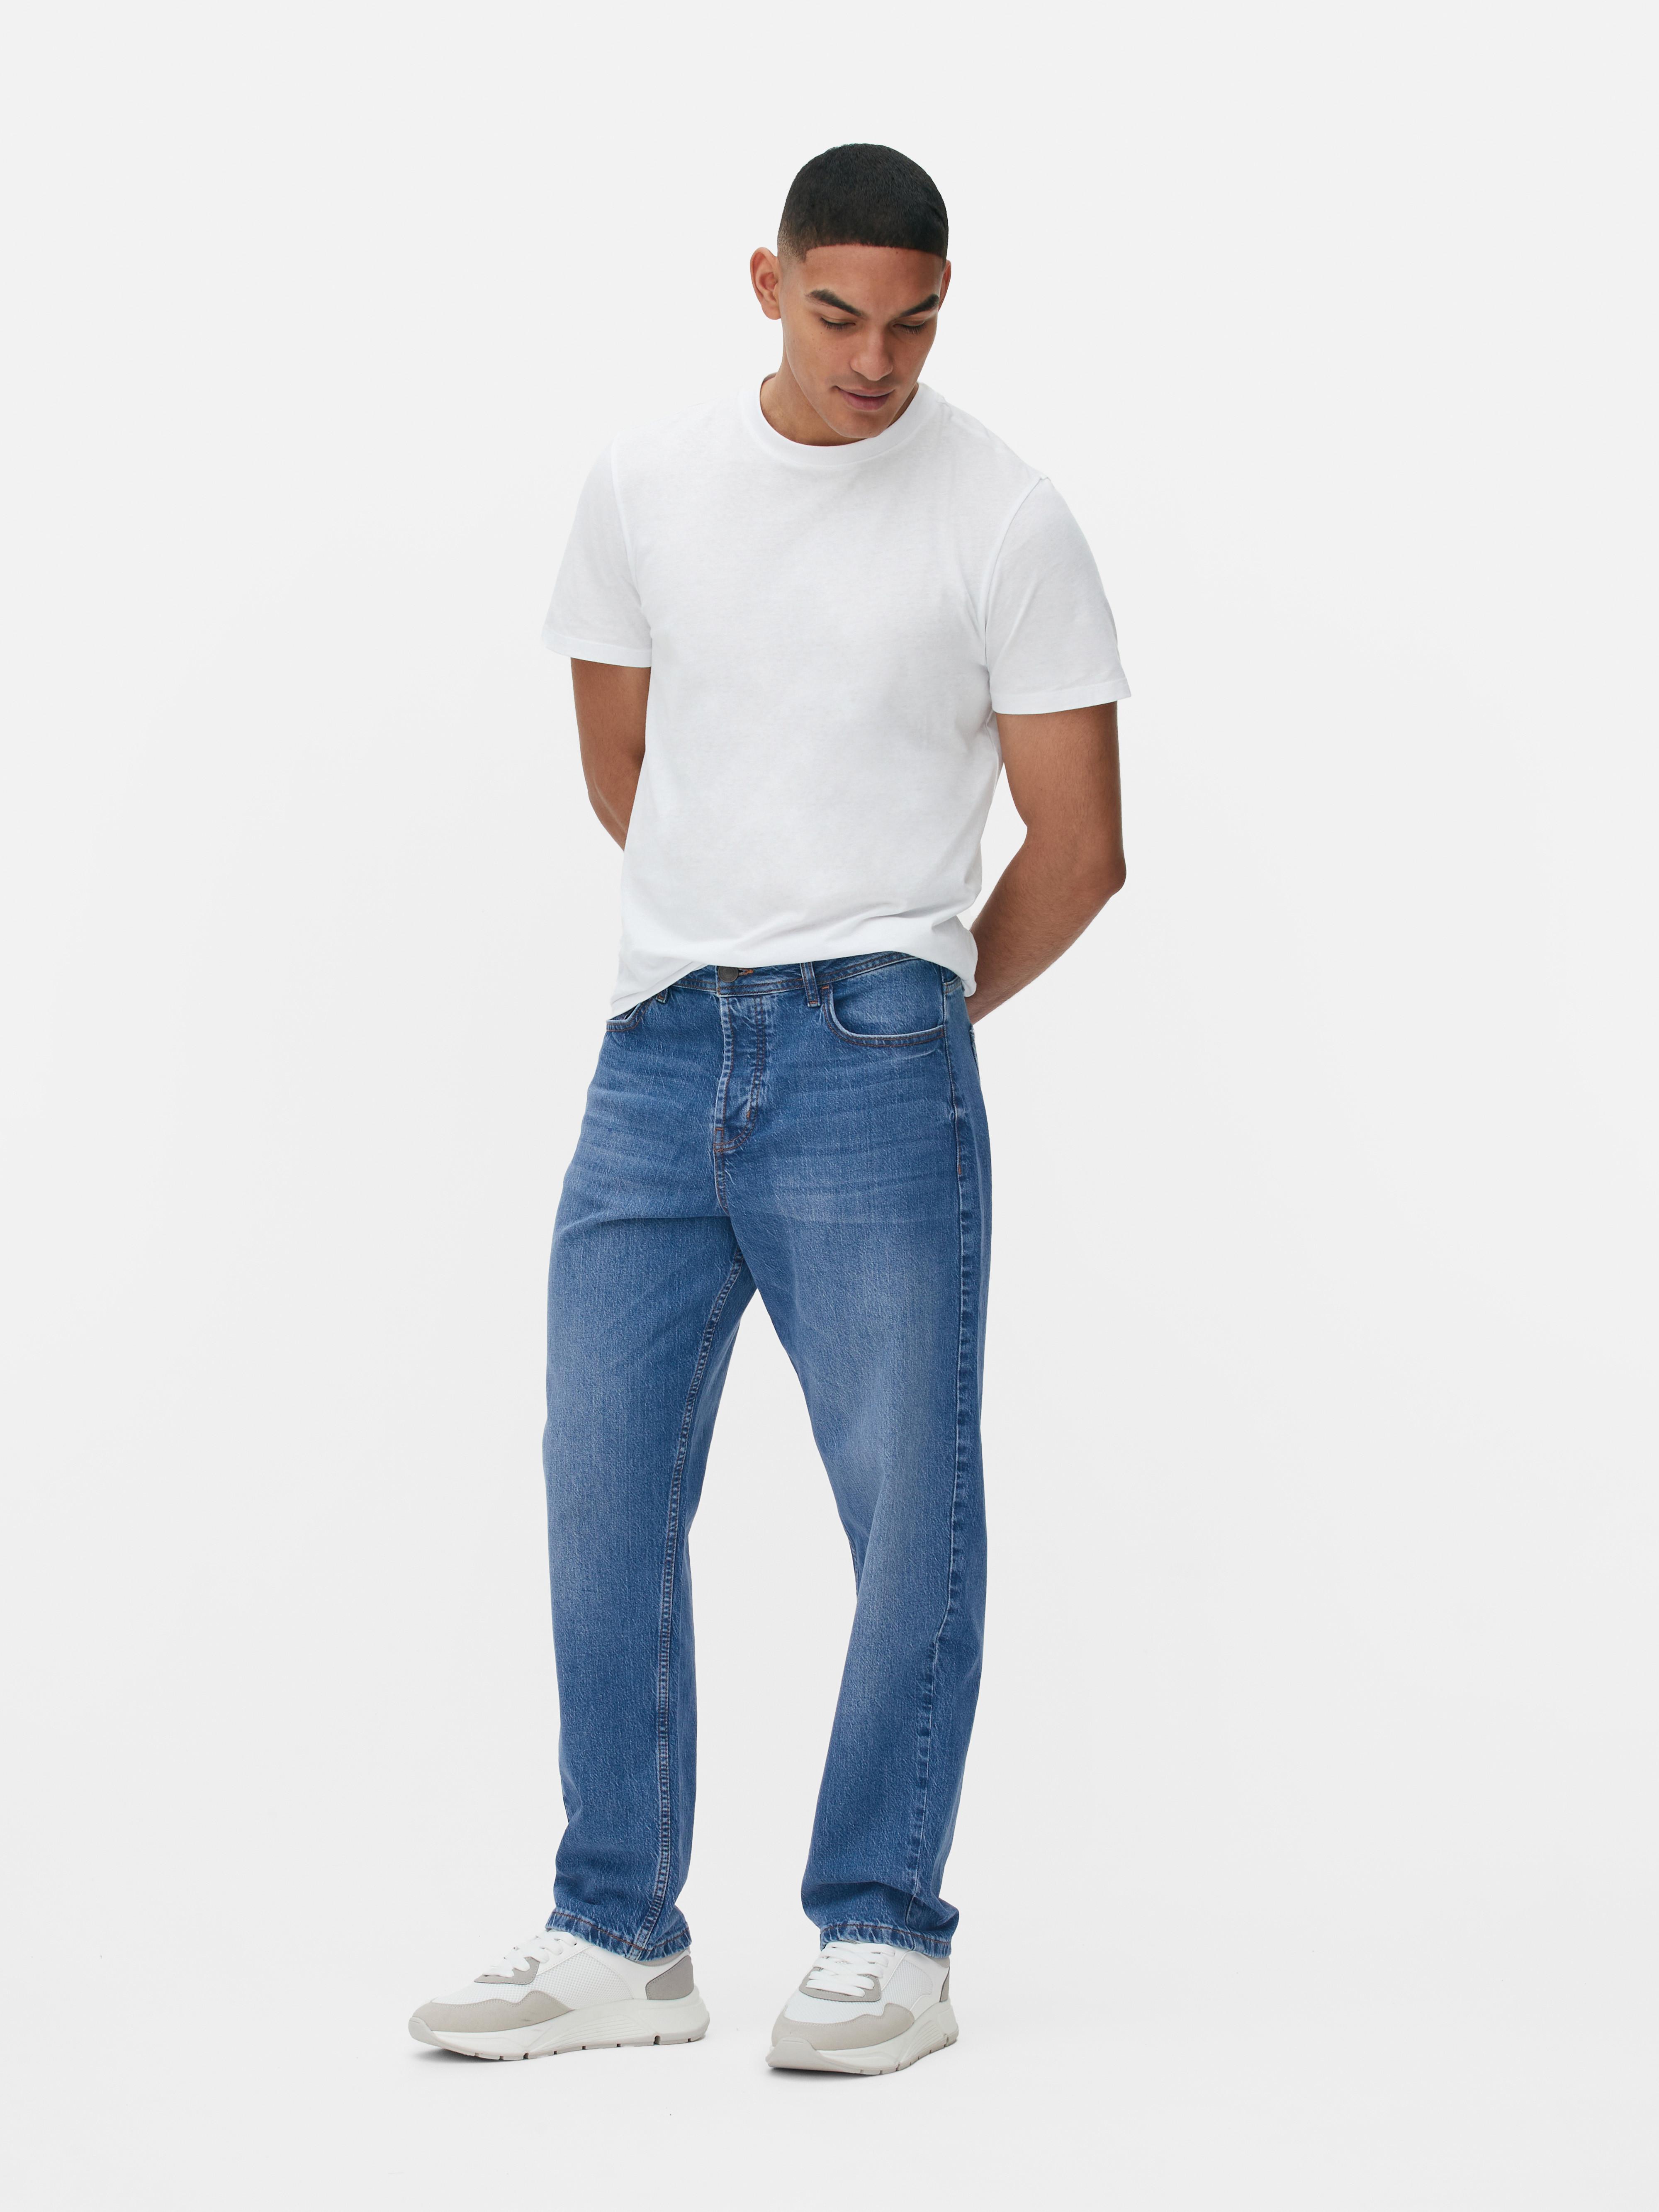 Relaxed Fit Denim Jeans